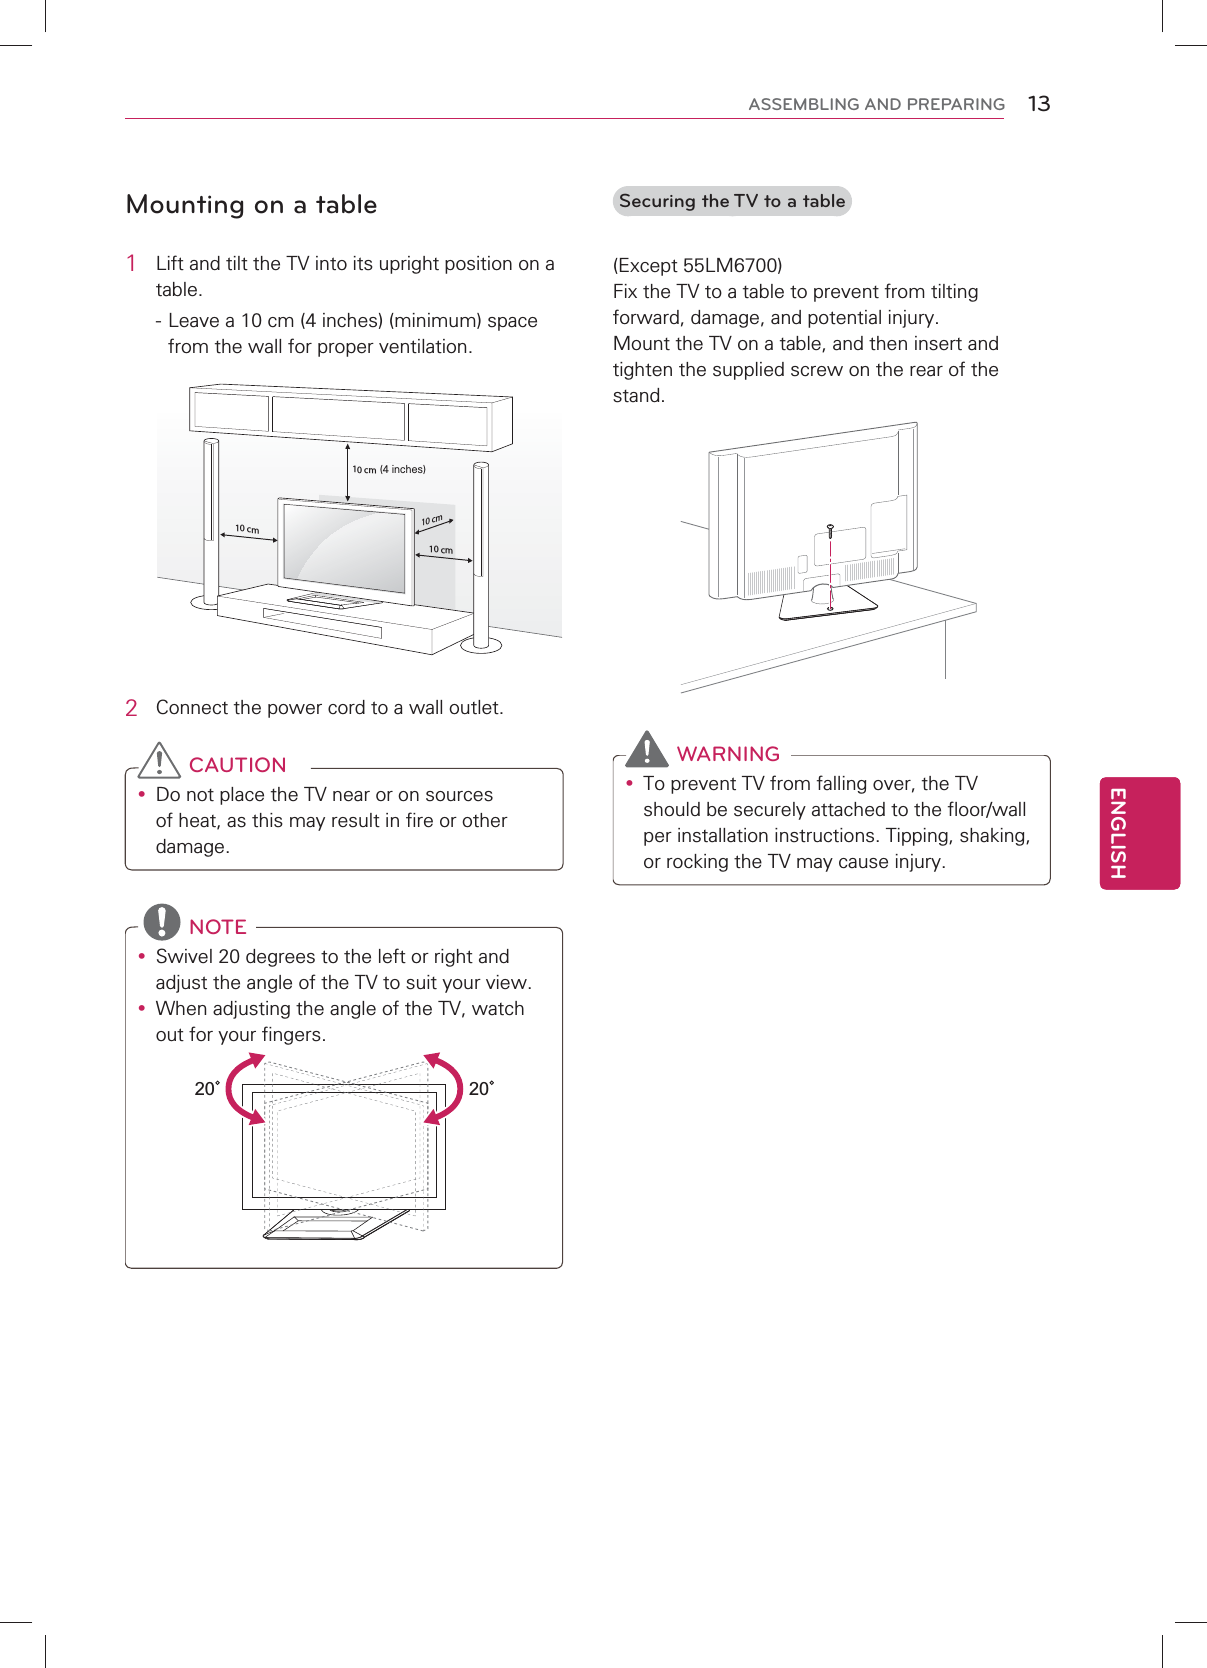 13ENGENGLISHASSEMBLING AND PREPARINGMounting on a table1  Lift and tilt the TV into its upright position on a table. - Leave a 10 cm (4 inches) (minimum) space from the wall for proper ventilation.10 cm10 cm10 cm10 cm(4 inches)2  Connect the power cord to a wall outlet. CAUTIONy Do not place the TV near or on sources of heat, as this may result in fire or other damage. NOTEy Swivel 20 degrees to the left or right and adjust the angle of the TV to suit your view.y When adjusting the angle of the TV, watch out for your fingers.2020  Securing the TV to a table(Except 55LM6700)Fix the TV to a table to prevent from tilting forward, damage, and potential injury.Mount the TV on a table, and then insert and tighten the supplied screw on the rear of the stand.  WARNINGy To prevent TV from falling over, the TV should be securely attached to the floor/wall per installation instructions. Tipping, shaking, or rocking the TV may cause injury.